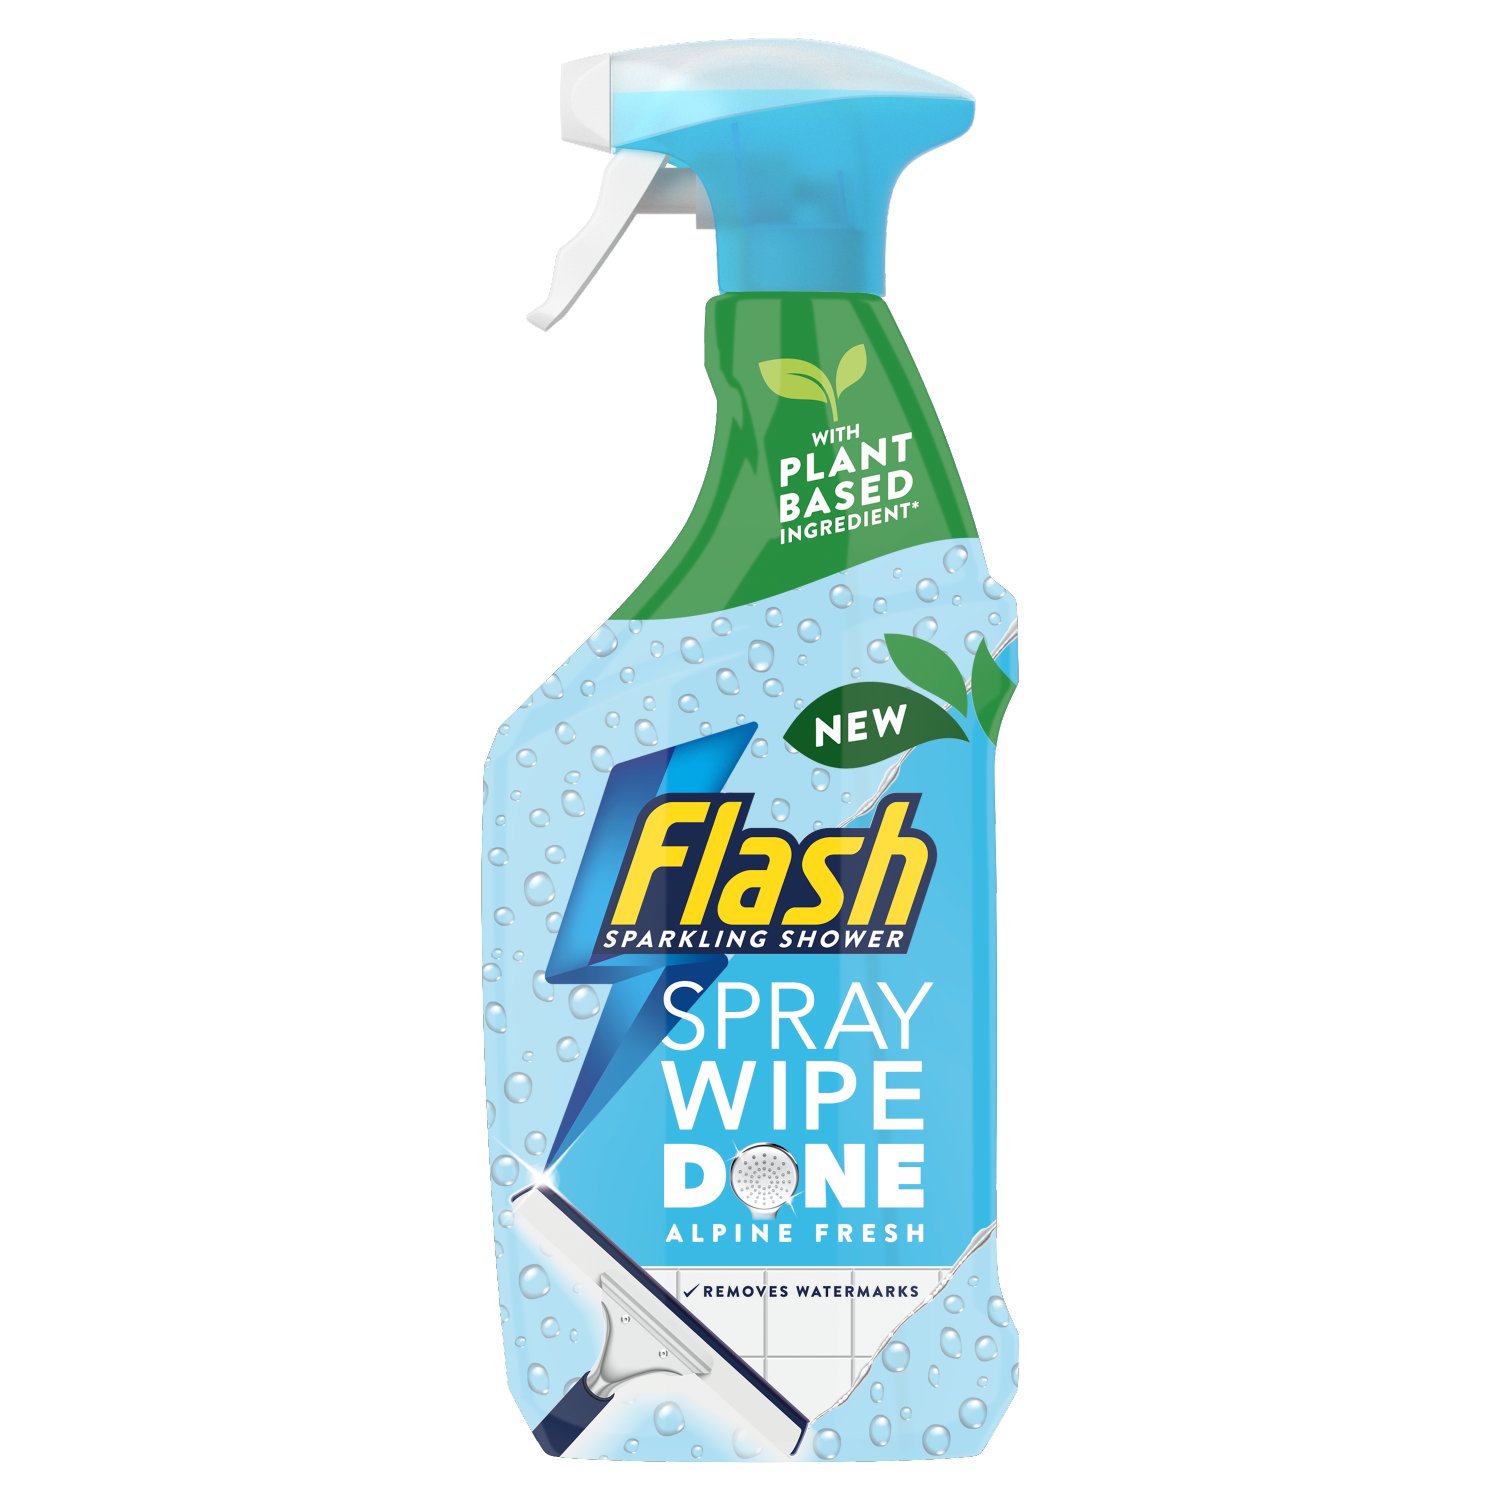 Flash Spray.Wipe.Done. Cleaning Spray will change the way you clean your surfaces, turning your To-do into a ta-daa! Just spray it everywhere, wipe it over and you are done! It’s that simple! It instantly removes water marks from your shower with no extra steps - no scrubbing, no streaks. It leaves nothing behind but a sparkling clean shower thanks to the plant-based ingredient (83% of total surfactants, which are subject to processing). A Spray a day keeps the water marks away!